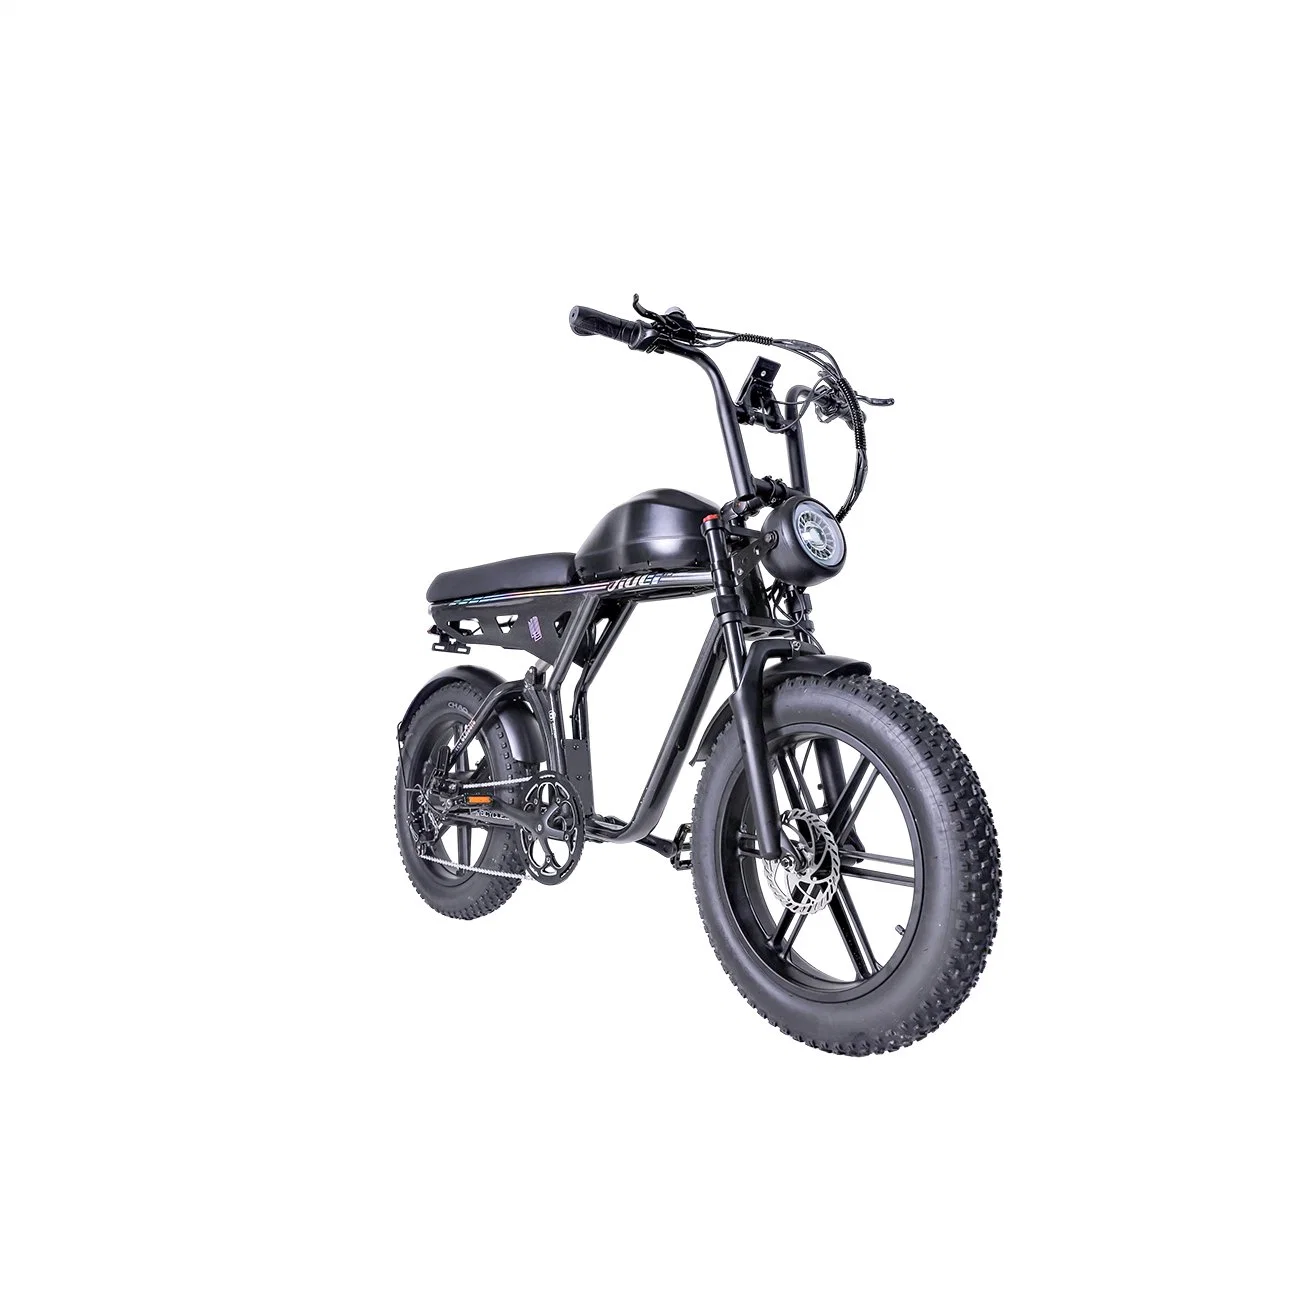 20*4.0 Fat Tire Male Mountain and Commuting Aluminium Frame Electric Bike E-Bicycle Ebike Dual Motor Available in Stock in The United States, Including Shipping